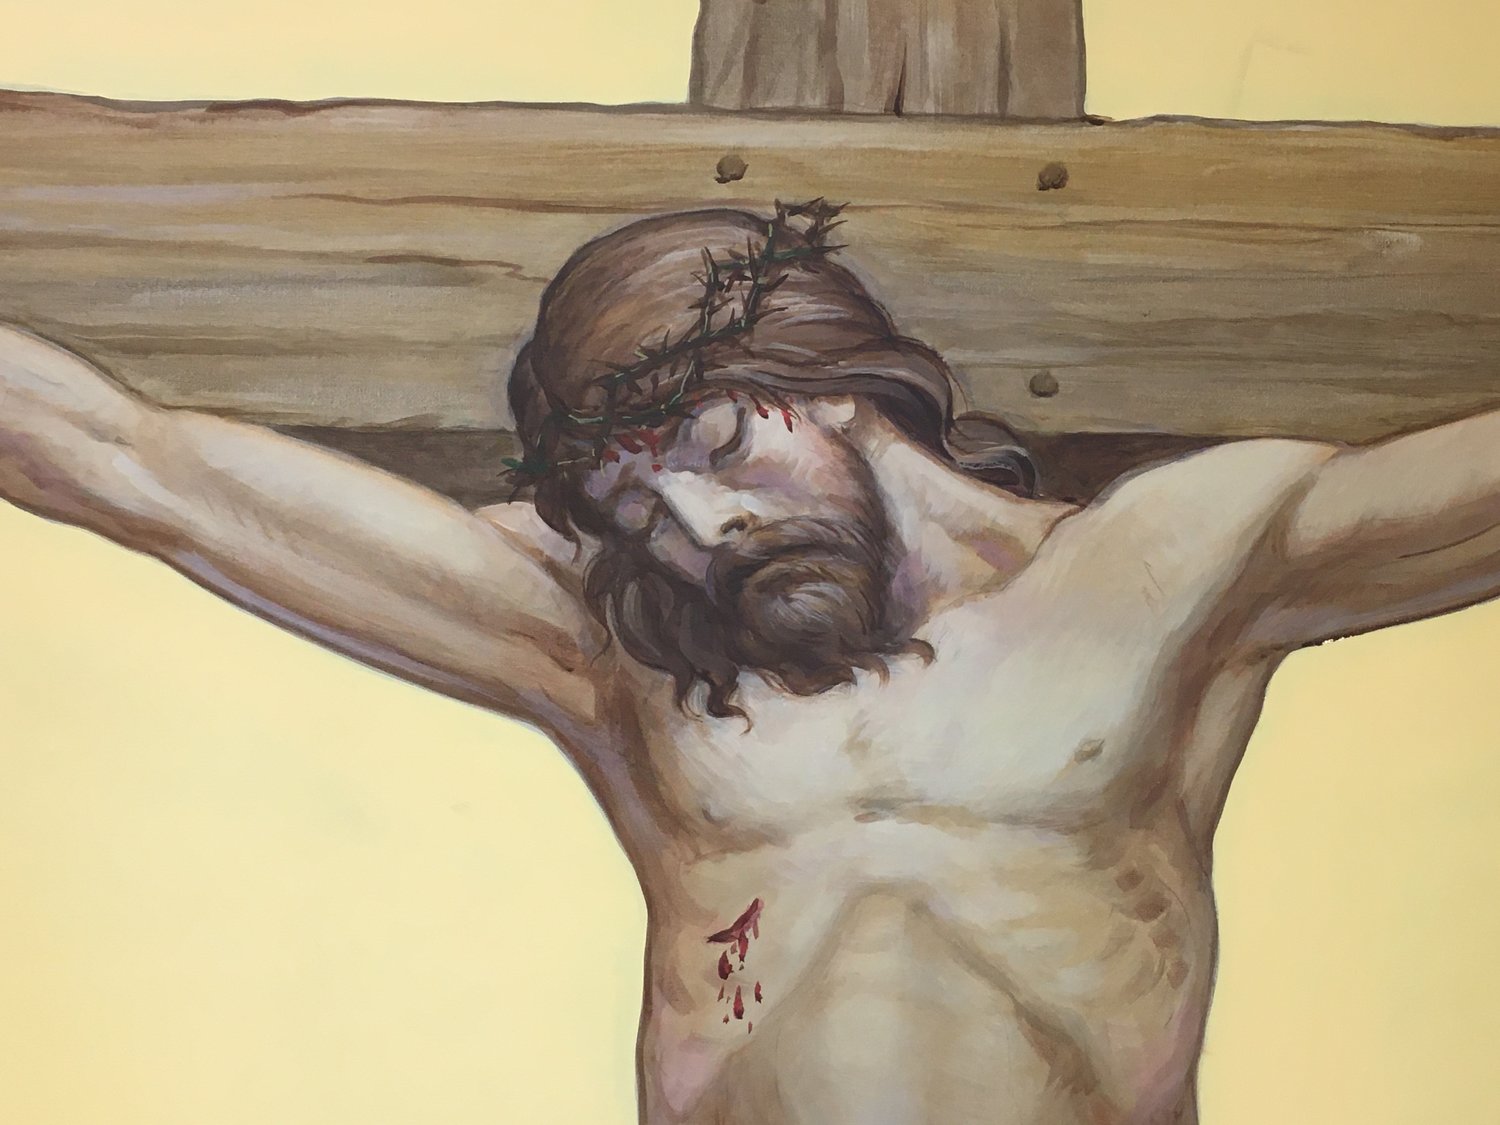 This is the completed image of Jesus's crucifixion.